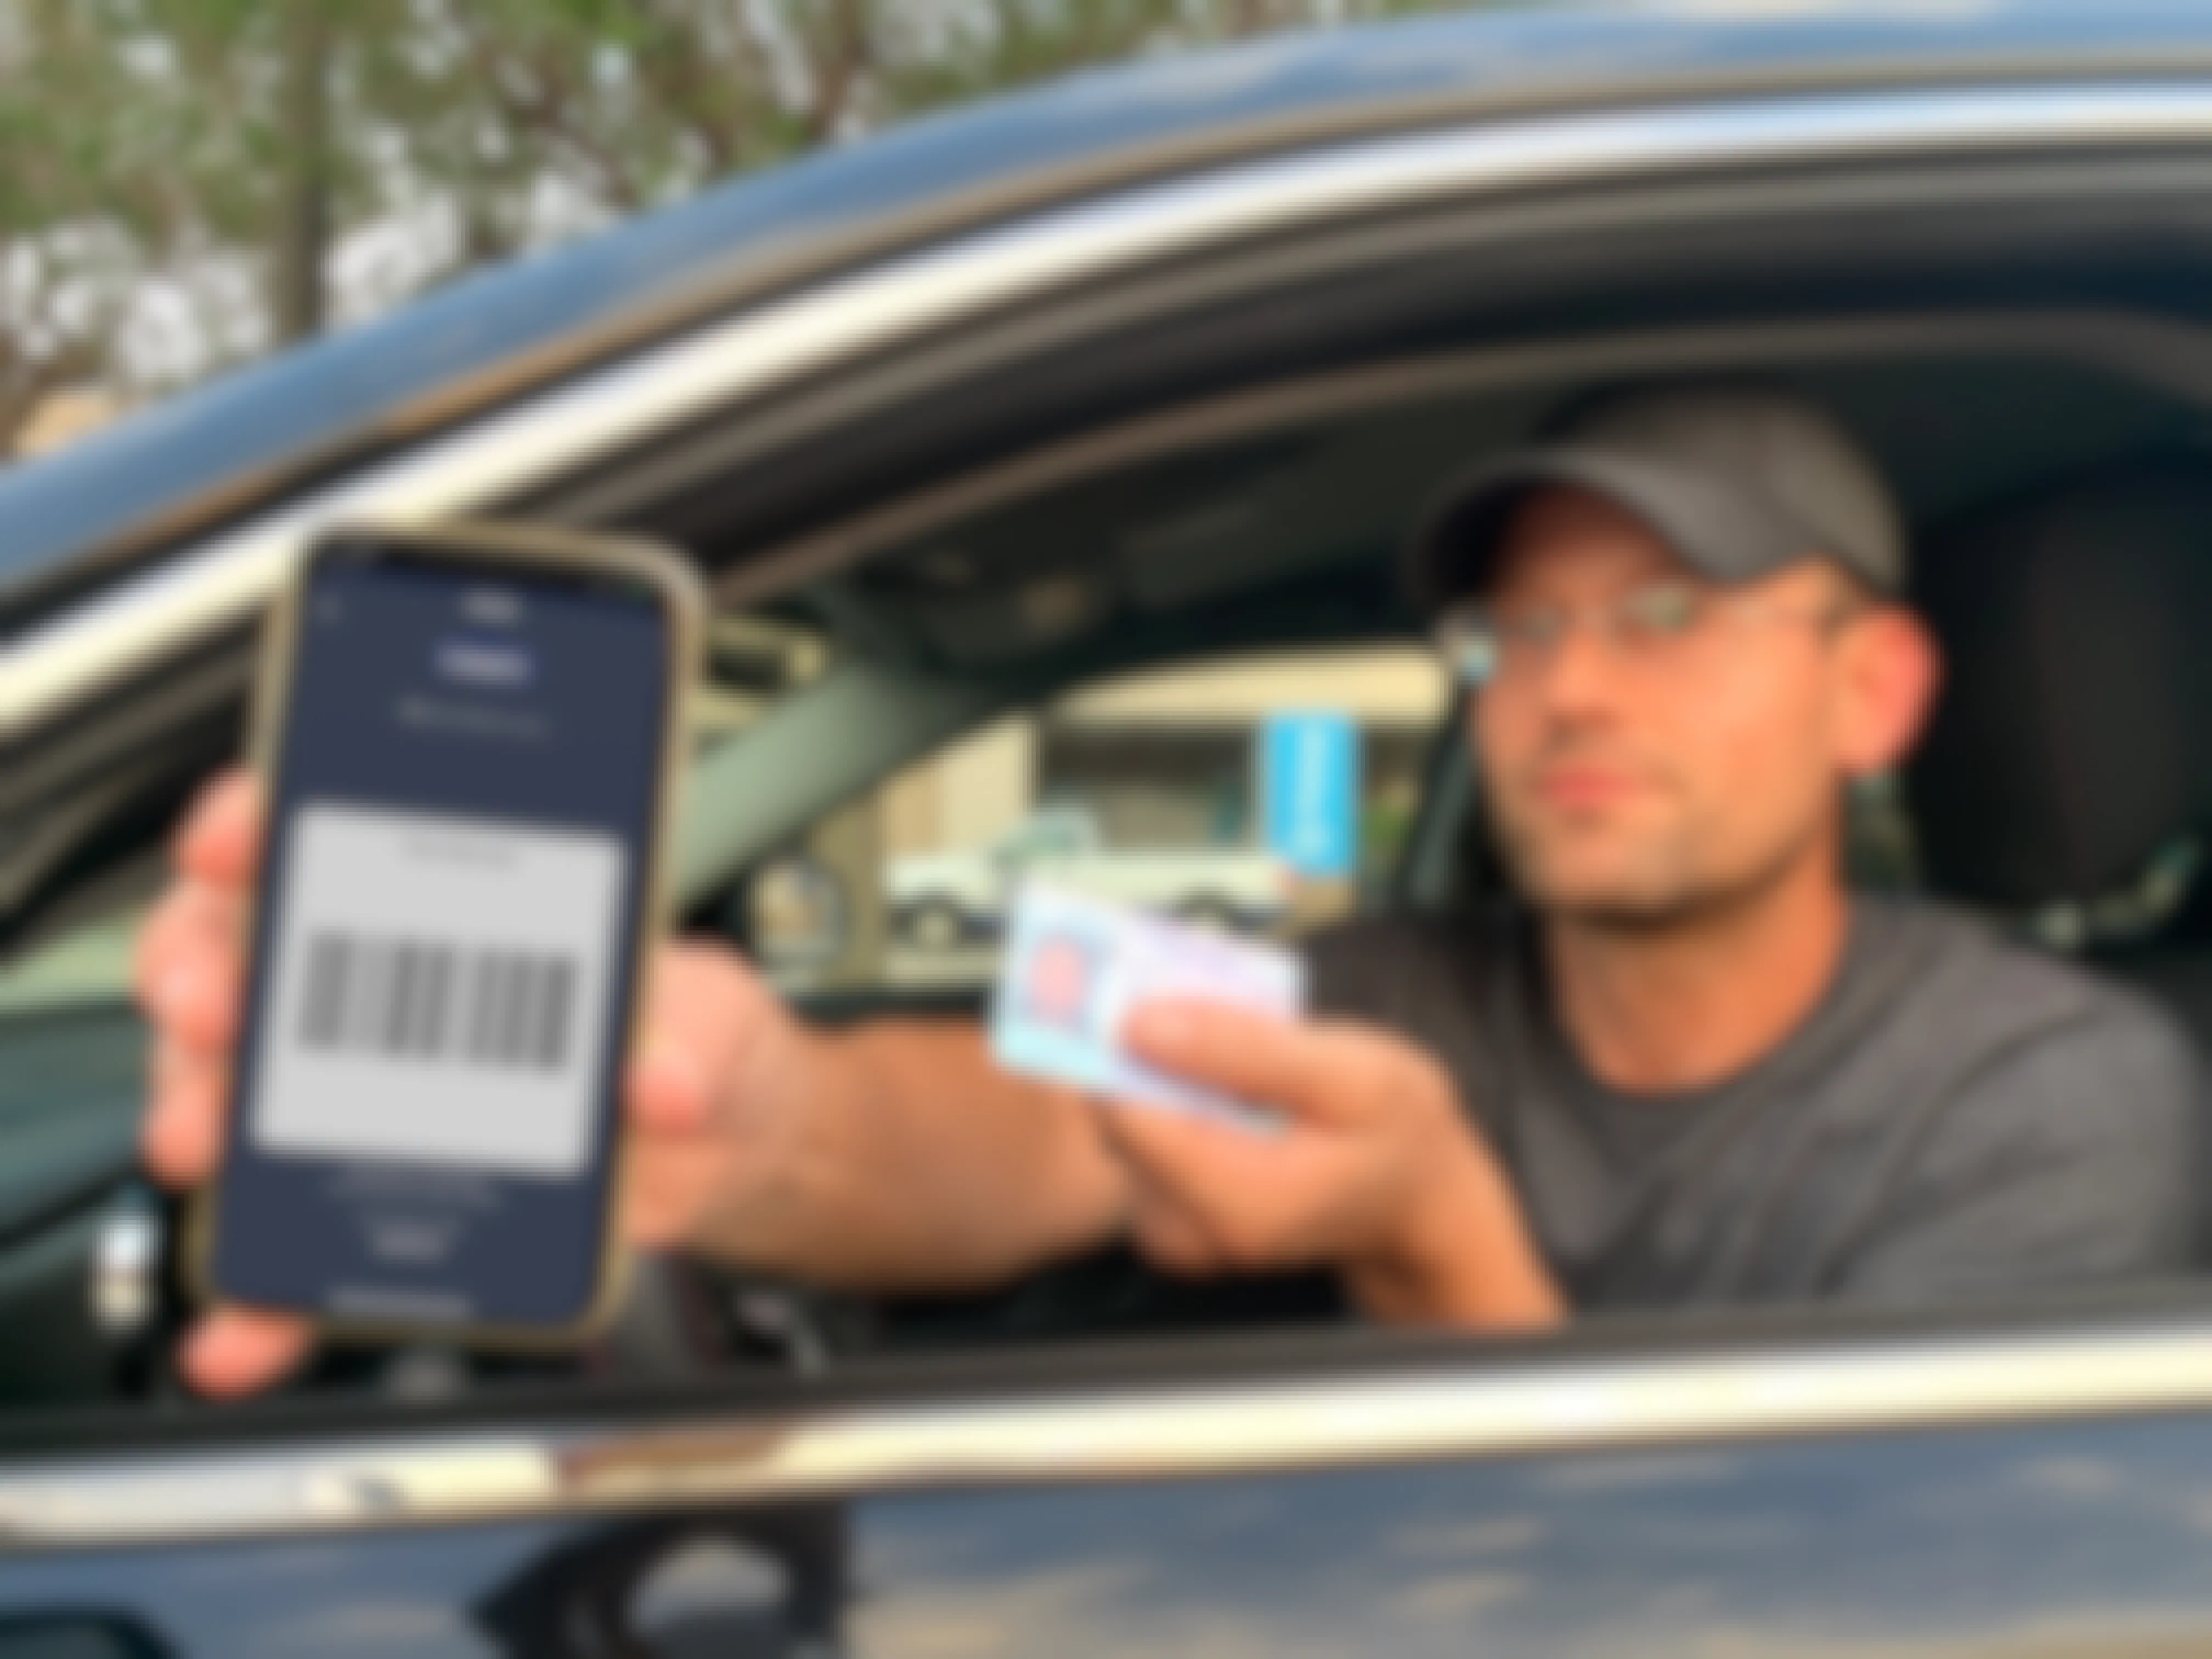 man holding photo id and cellphone with lowes scan barcode